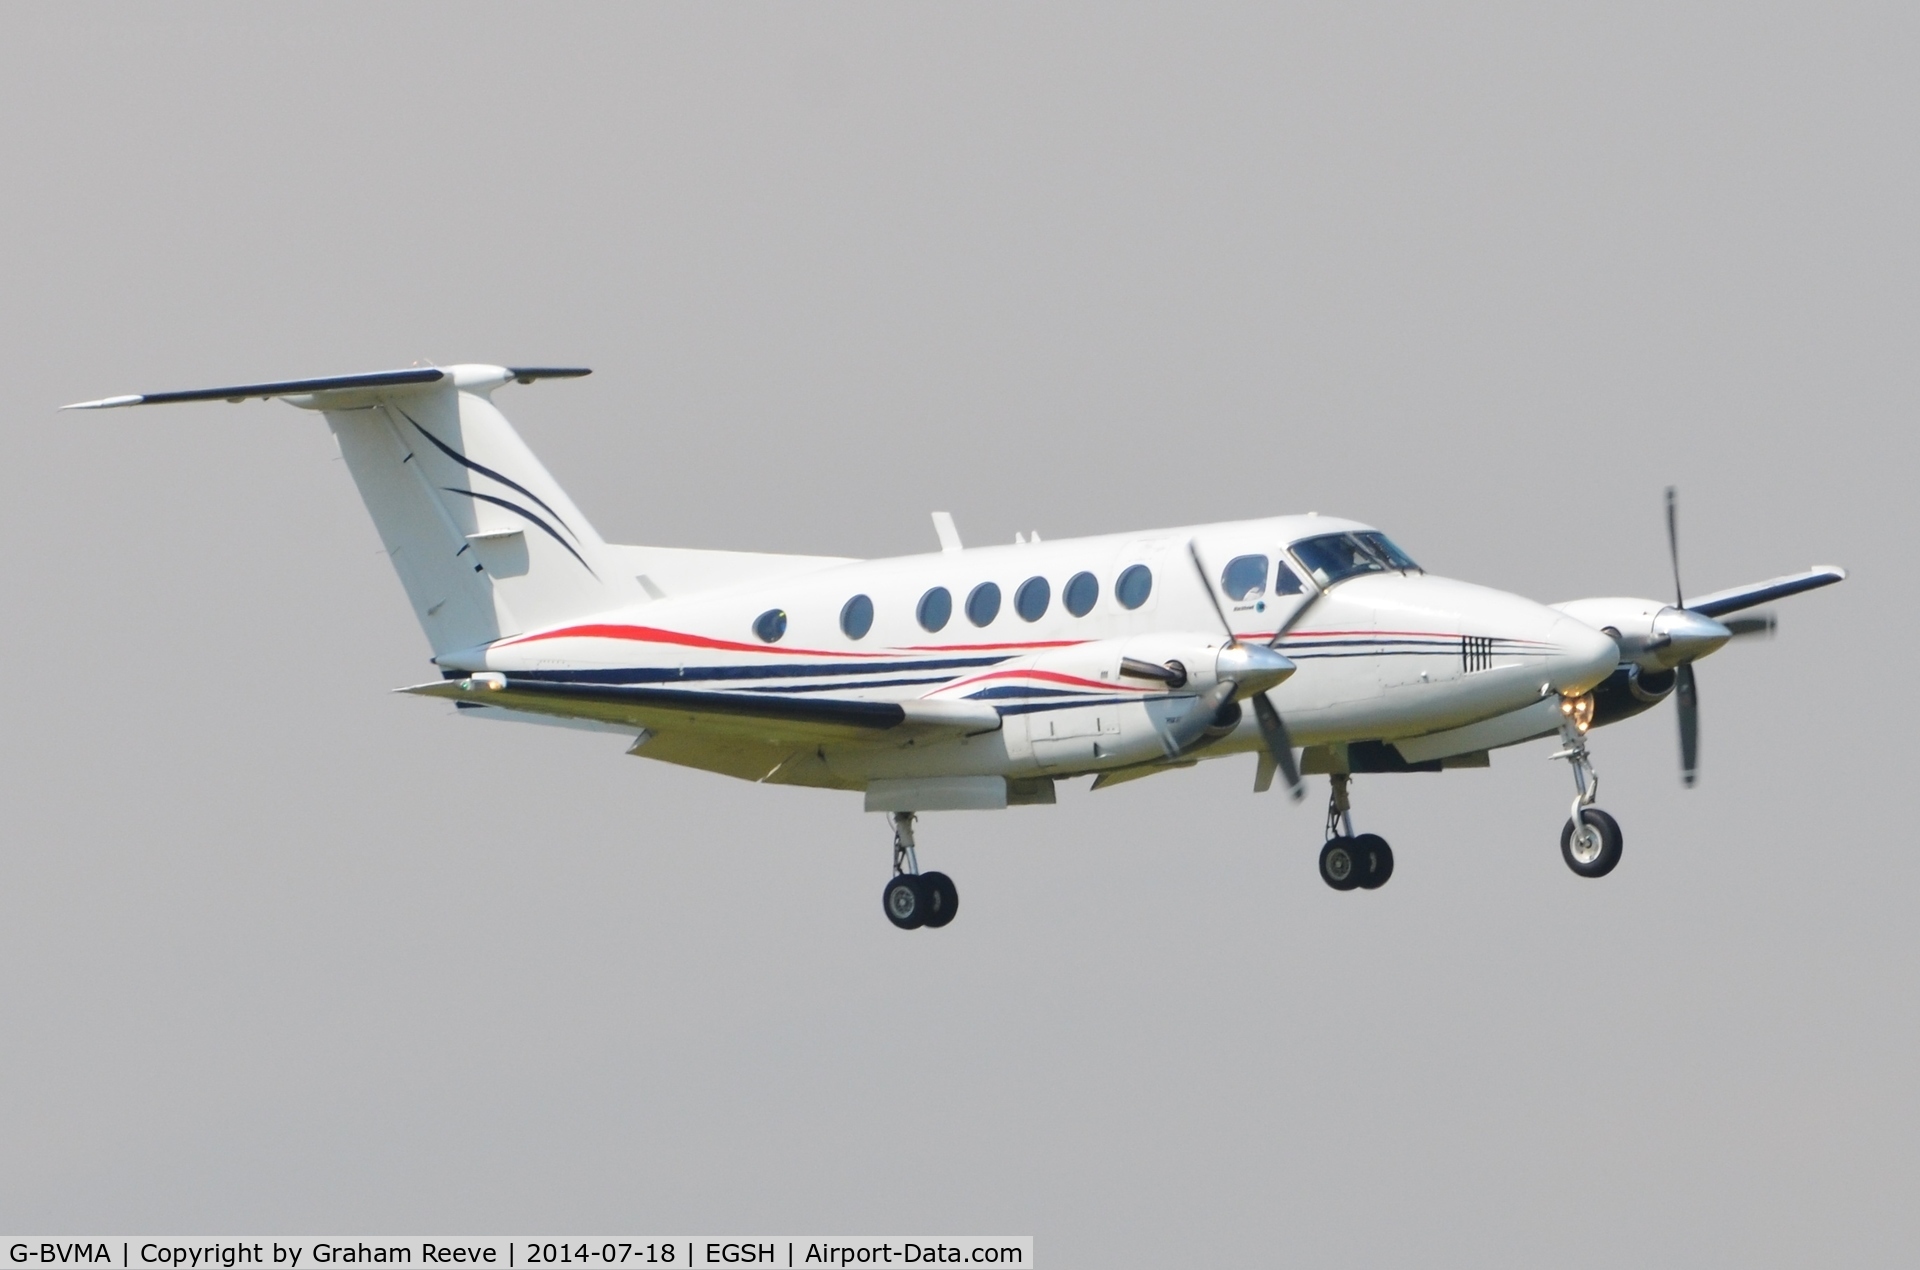 G-BVMA, 1980 Beech 200 Super King Air C/N BB-797, About to land on runway 